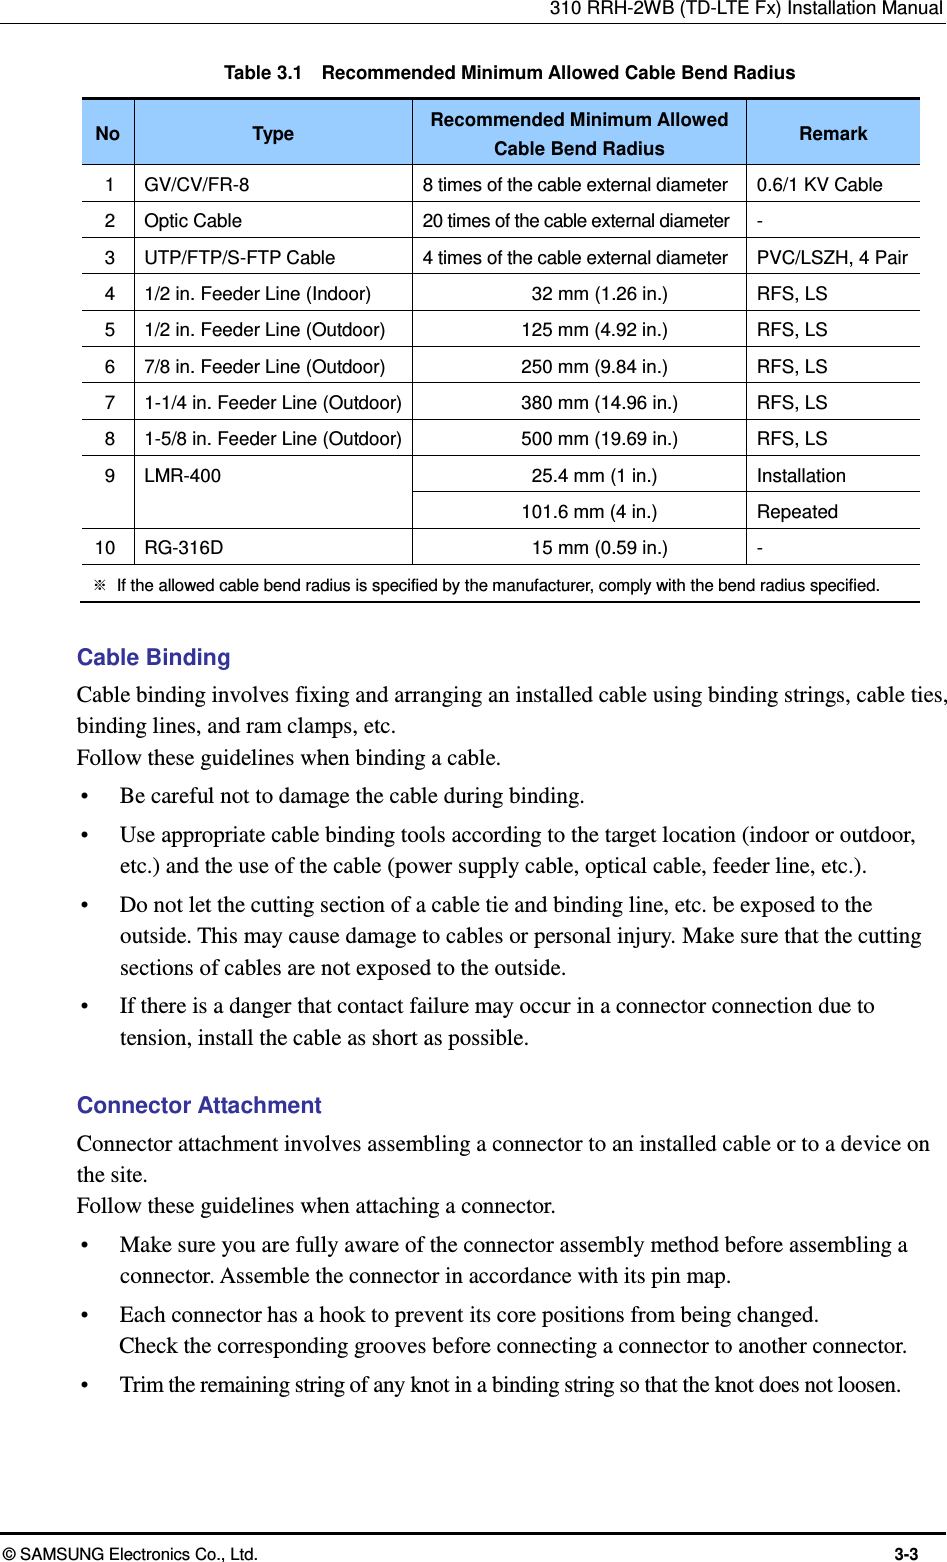 310 RRH-2WB (TD-LTE Fx) Installation Manual  © SAMSUNG Electronics Co., Ltd.  3-3 Table 3.1    Recommended Minimum Allowed Cable Bend Radius No Type Recommended Minimum Allowed Cable Bend Radius Remark 1 GV/CV/FR-8 8 times of the cable external diameter 0.6/1 KV Cable 2 Optic Cable 20 times of the cable external diameter - 3 UTP/FTP/S-FTP Cable 4 times of the cable external diameter PVC/LSZH, 4 Pair 4 1/2 in. Feeder Line (Indoor) 32 mm (1.26 in.) RFS, LS 5 1/2 in. Feeder Line (Outdoor) 125 mm (4.92 in.) RFS, LS 6 7/8 in. Feeder Line (Outdoor) 250 mm (9.84 in.) RFS, LS 7 1-1/4 in. Feeder Line (Outdoor) 380 mm (14.96 in.) RFS, LS 8 1-5/8 in. Feeder Line (Outdoor) 500 mm (19.69 in.) RFS, LS 9 LMR-400 25.4 mm (1 in.) Installation 101.6 mm (4 in.) Repeated 10 RG-316D 15 mm (0.59 in.) - ※  If the allowed cable bend radius is specified by the manufacturer, comply with the bend radius specified.  Cable Binding Cable binding involves fixing and arranging an installed cable using binding strings, cable ties, binding lines, and ram clamps, etc. Follow these guidelines when binding a cable.    Be careful not to damage the cable during binding.  Use appropriate cable binding tools according to the target location (indoor or outdoor, etc.) and the use of the cable (power supply cable, optical cable, feeder line, etc.).  Do not let the cutting section of a cable tie and binding line, etc. be exposed to the outside. This may cause damage to cables or personal injury. Make sure that the cutting sections of cables are not exposed to the outside.  If there is a danger that contact failure may occur in a connector connection due to tension, install the cable as short as possible.  Connector Attachment Connector attachment involves assembling a connector to an installed cable or to a device on the site. Follow these guidelines when attaching a connector.    Make sure you are fully aware of the connector assembly method before assembling a connector. Assemble the connector in accordance with its pin map.  Each connector has a hook to prevent its core positions from being changed.   Check the corresponding grooves before connecting a connector to another connector.  Trim the remaining string of any knot in a binding string so that the knot does not loosen. 